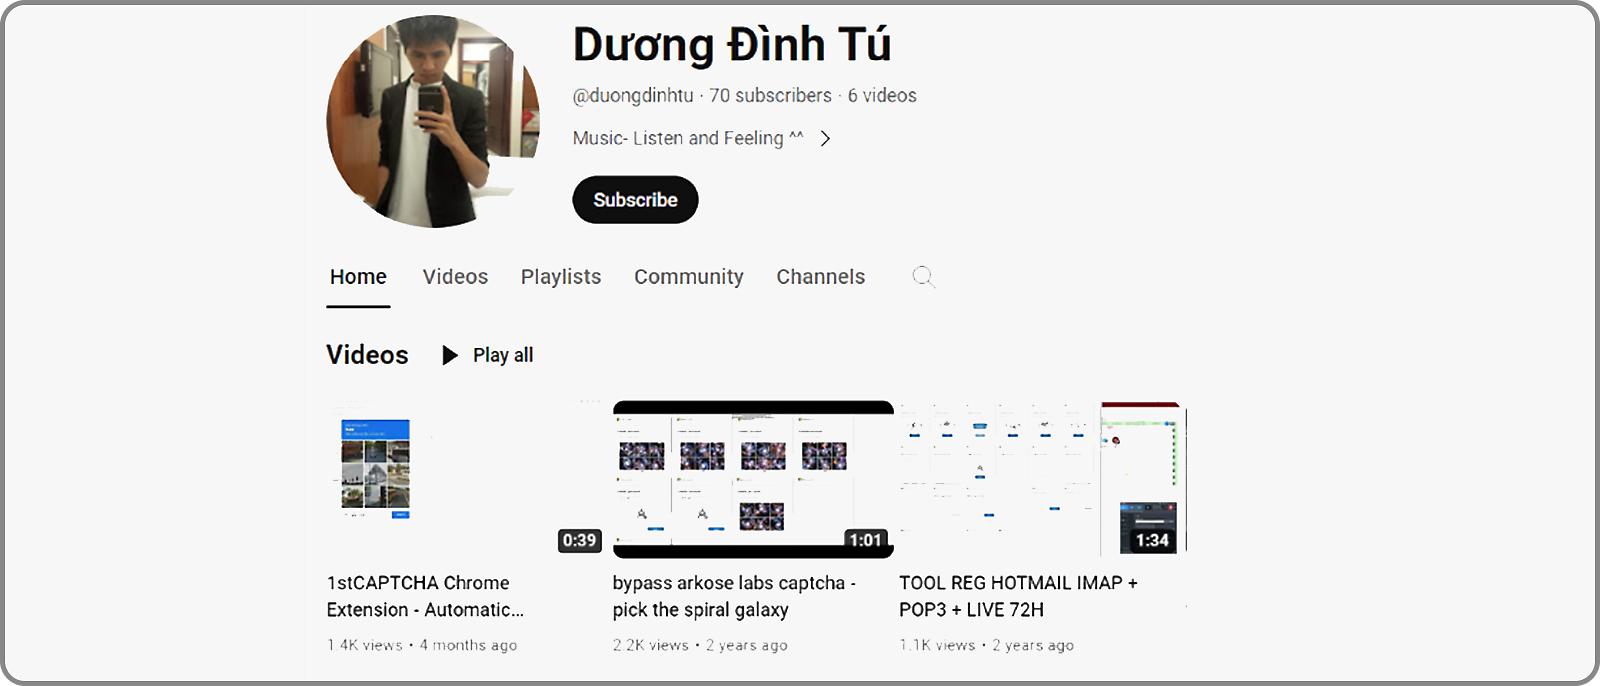 Duong Dinh Tu’s YouTube channel